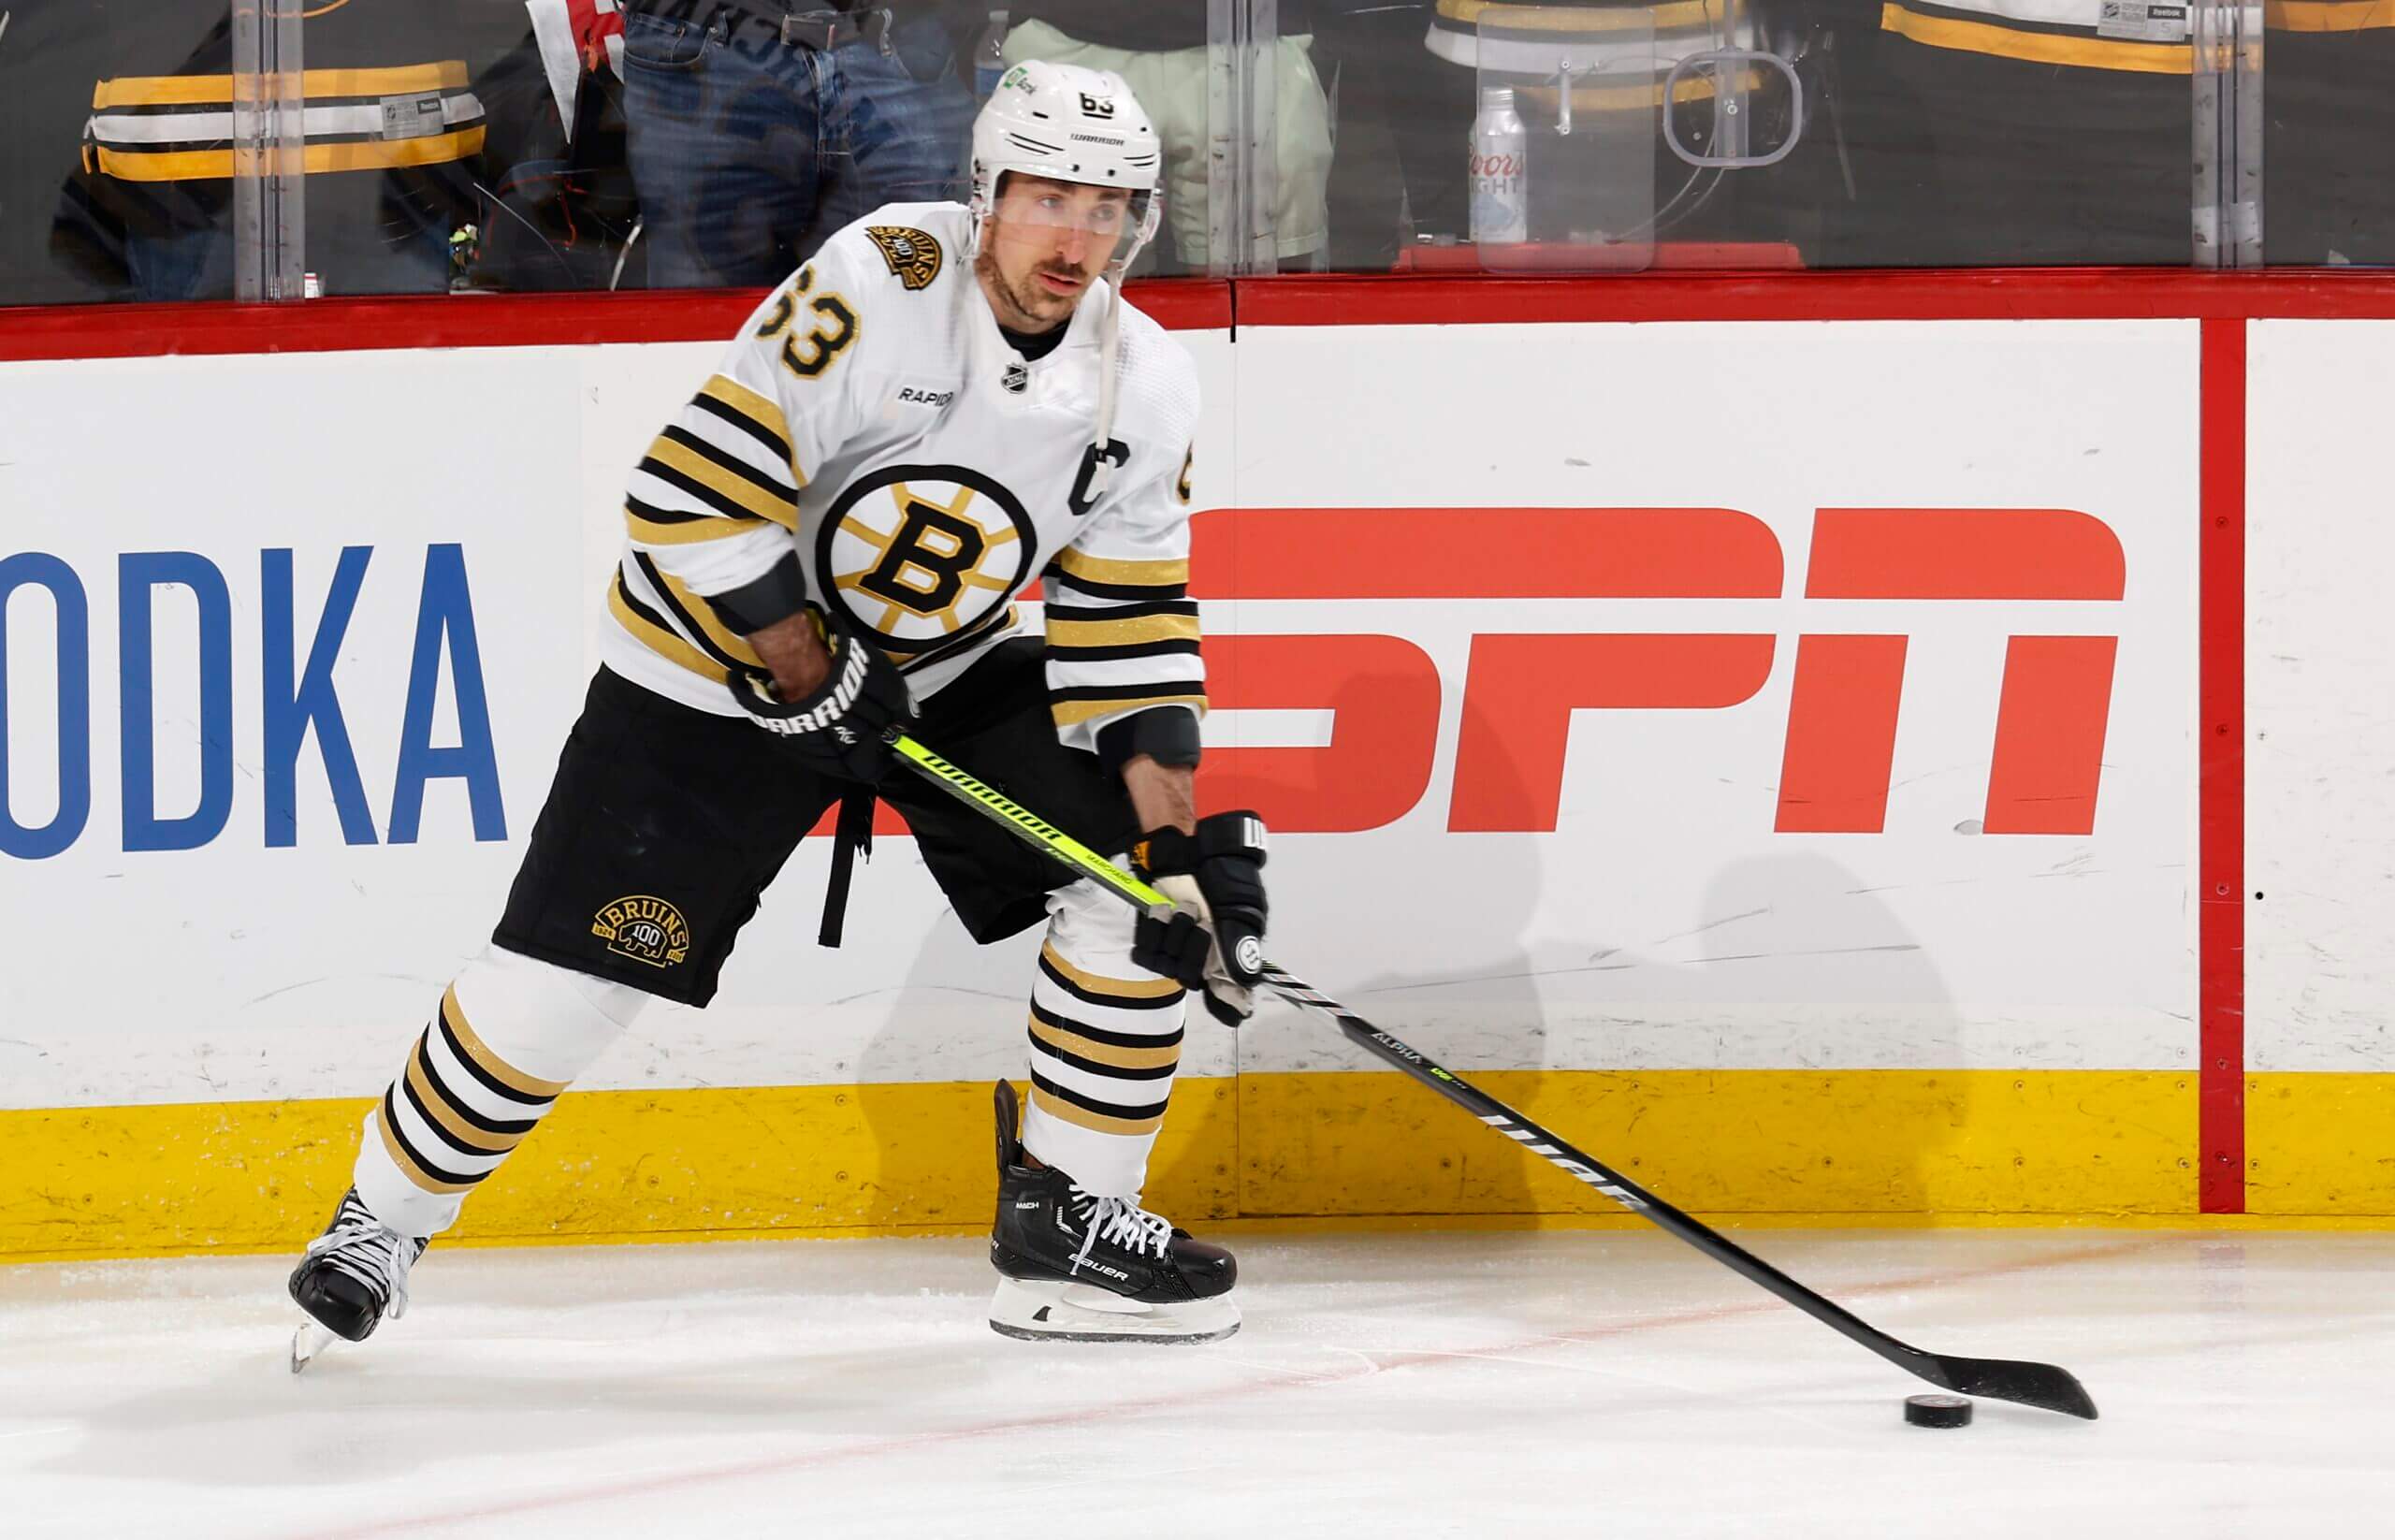 If Marchand returns to Bruins lineup for Game 6, who comes out?